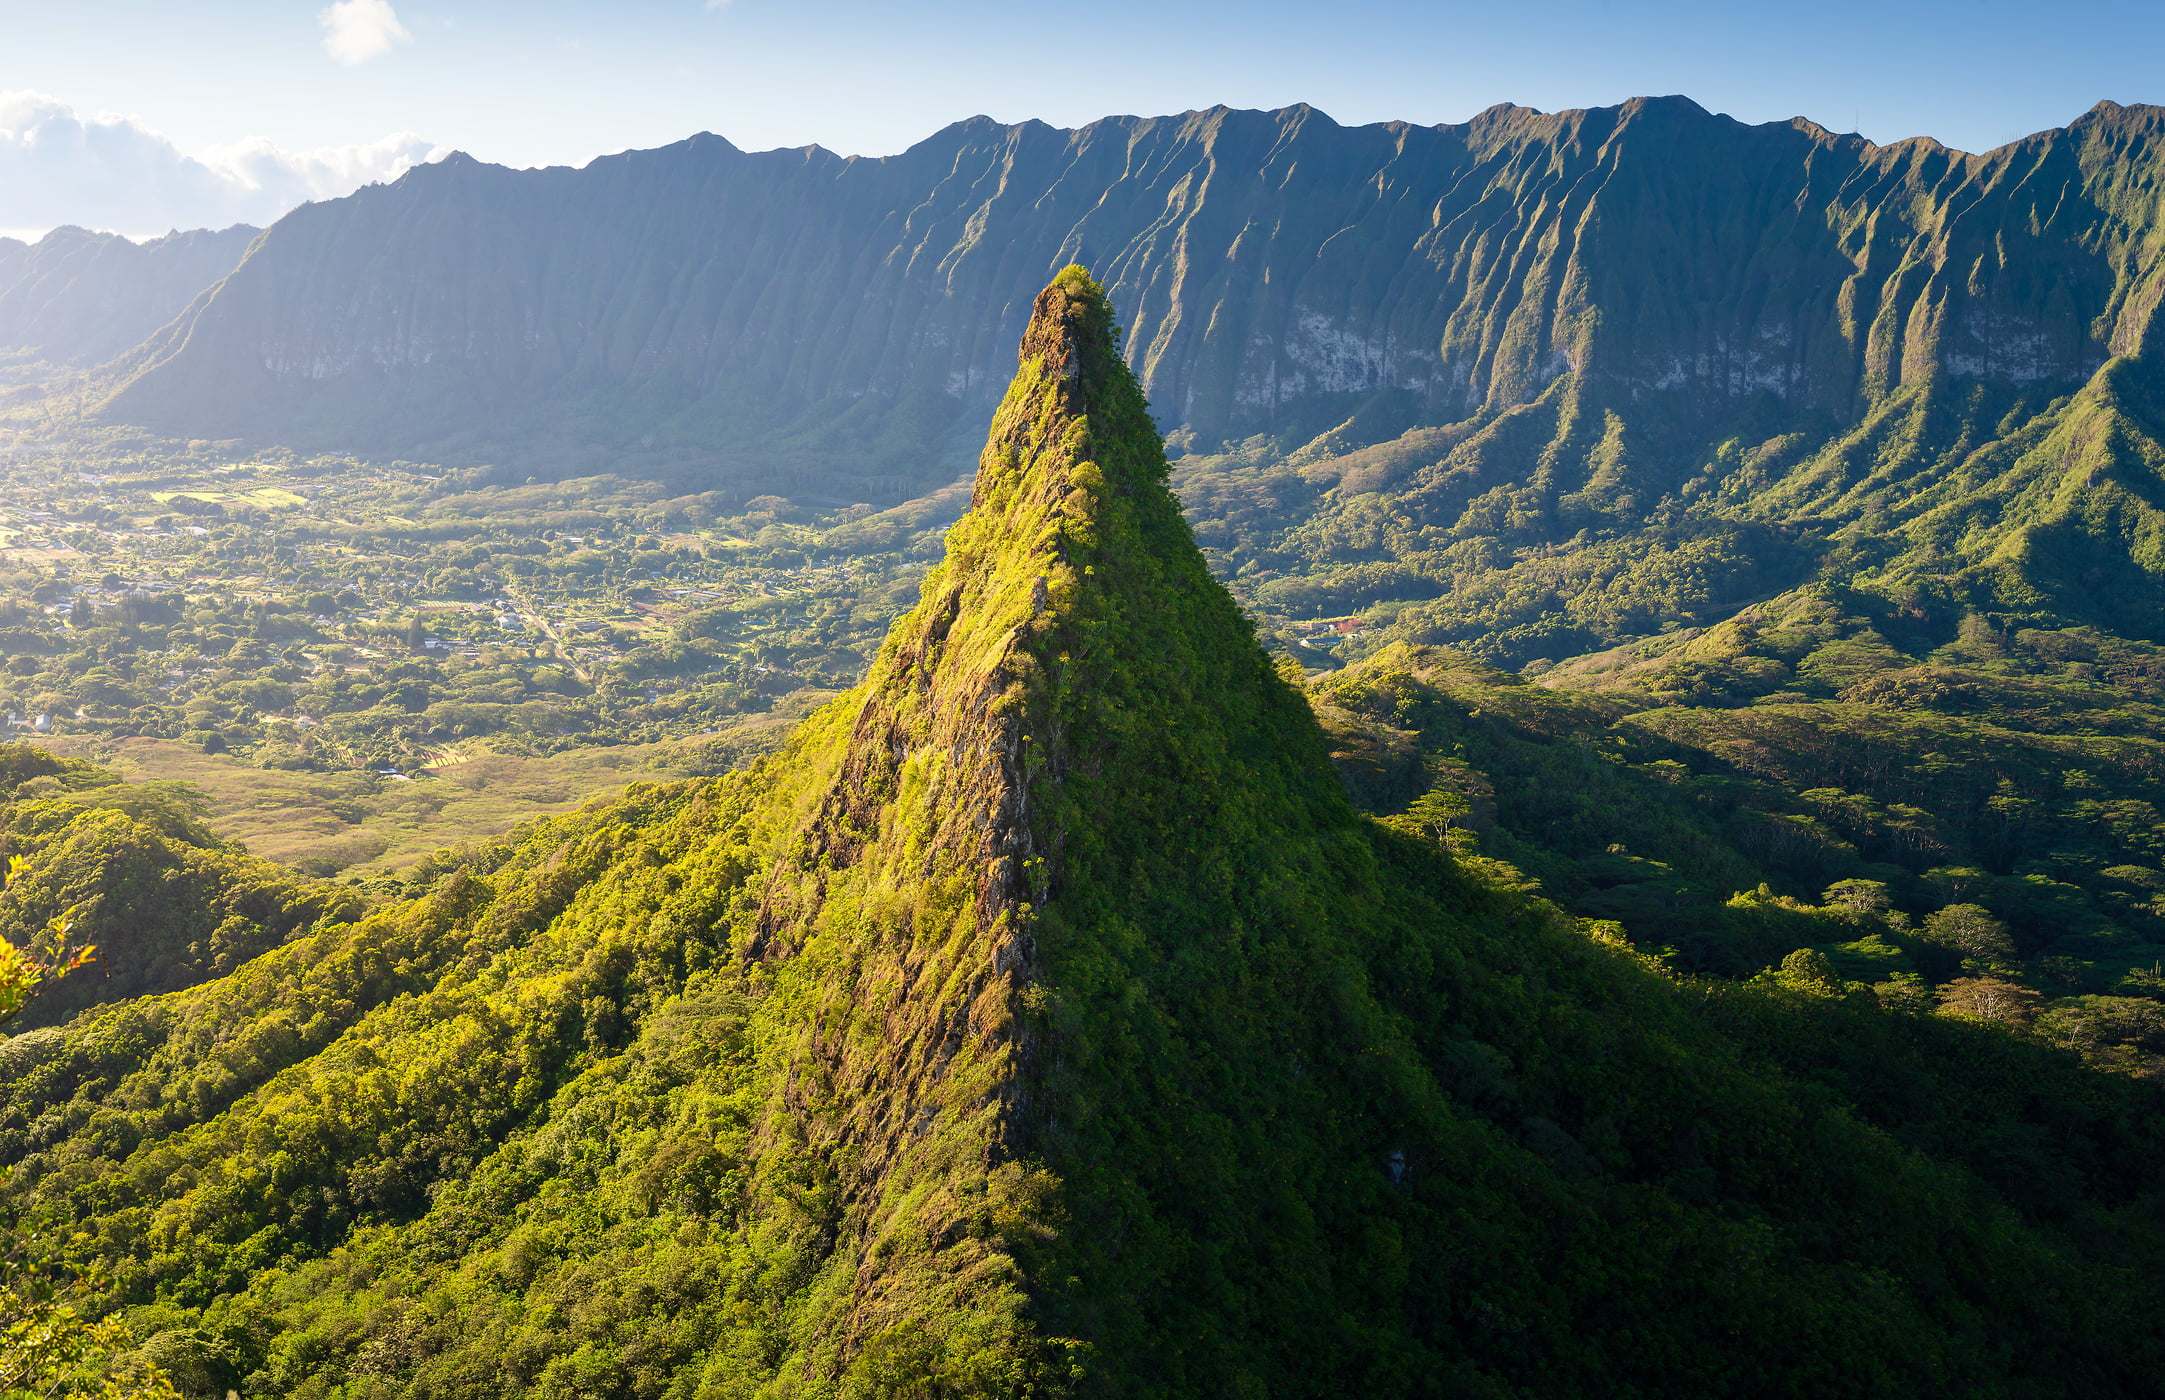 296 megapixels! A very high resolution, large-format VAST photo print of a Hawaii landscape; art photograph created by Jeff Lewis in Kaneohe, Hawaii.